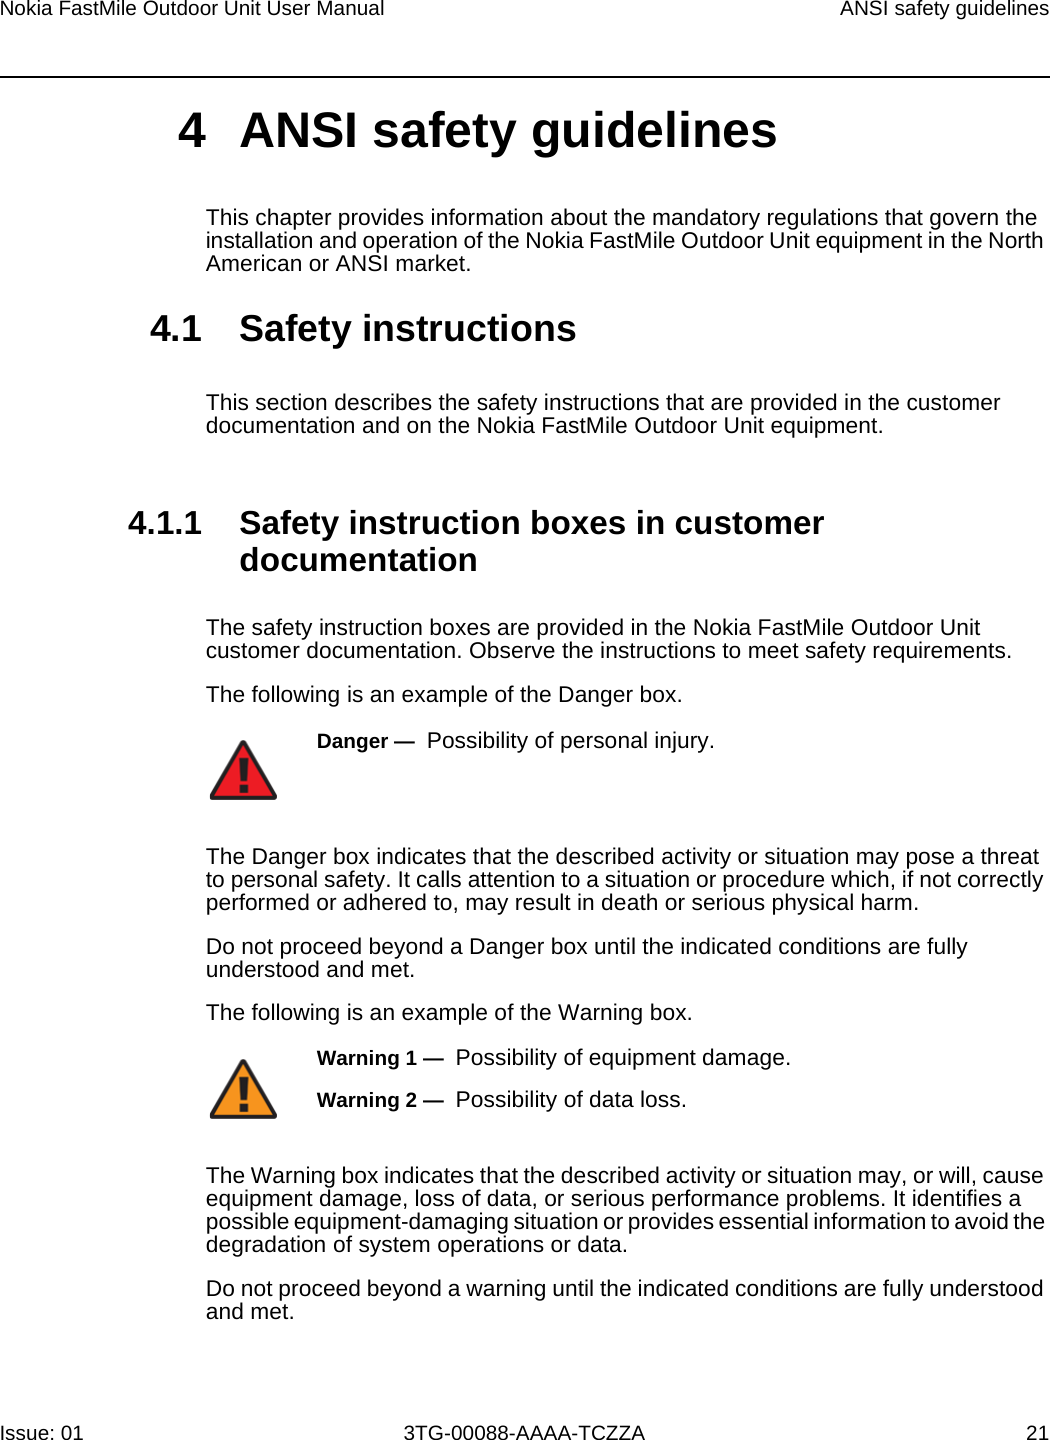 Nokia FastMile Outdoor Unit User Manual ANSI safety guidelinesIssue: 01 3TG-00088-AAAA-TCZZA 214 ANSI safety guidelinesThis chapter provides information about the mandatory regulations that govern the installation and operation of the Nokia FastMile Outdoor Unit equipment in the North American or ANSI market.4.1 Safety instructionsThis section describes the safety instructions that are provided in the customer documentation and on the Nokia FastMile Outdoor Unit equipment.4.1.1 Safety instruction boxes in customer documentationThe safety instruction boxes are provided in the Nokia FastMile Outdoor Unit customer documentation. Observe the instructions to meet safety requirements.The following is an example of the Danger box.The Danger box indicates that the described activity or situation may pose a threat to personal safety. It calls attention to a situation or procedure which, if not correctly performed or adhered to, may result in death or serious physical harm. Do not proceed beyond a Danger box until the indicated conditions are fully understood and met.The following is an example of the Warning box.The Warning box indicates that the described activity or situation may, or will, cause equipment damage, loss of data, or serious performance problems. It identifies a possible equipment-damaging situation or provides essential information to avoid the degradation of system operations or data.Do not proceed beyond a warning until the indicated conditions are fully understood and met.Danger —  Possibility of personal injury. Warning 1 —  Possibility of equipment damage.Warning 2 —  Possibility of data loss.